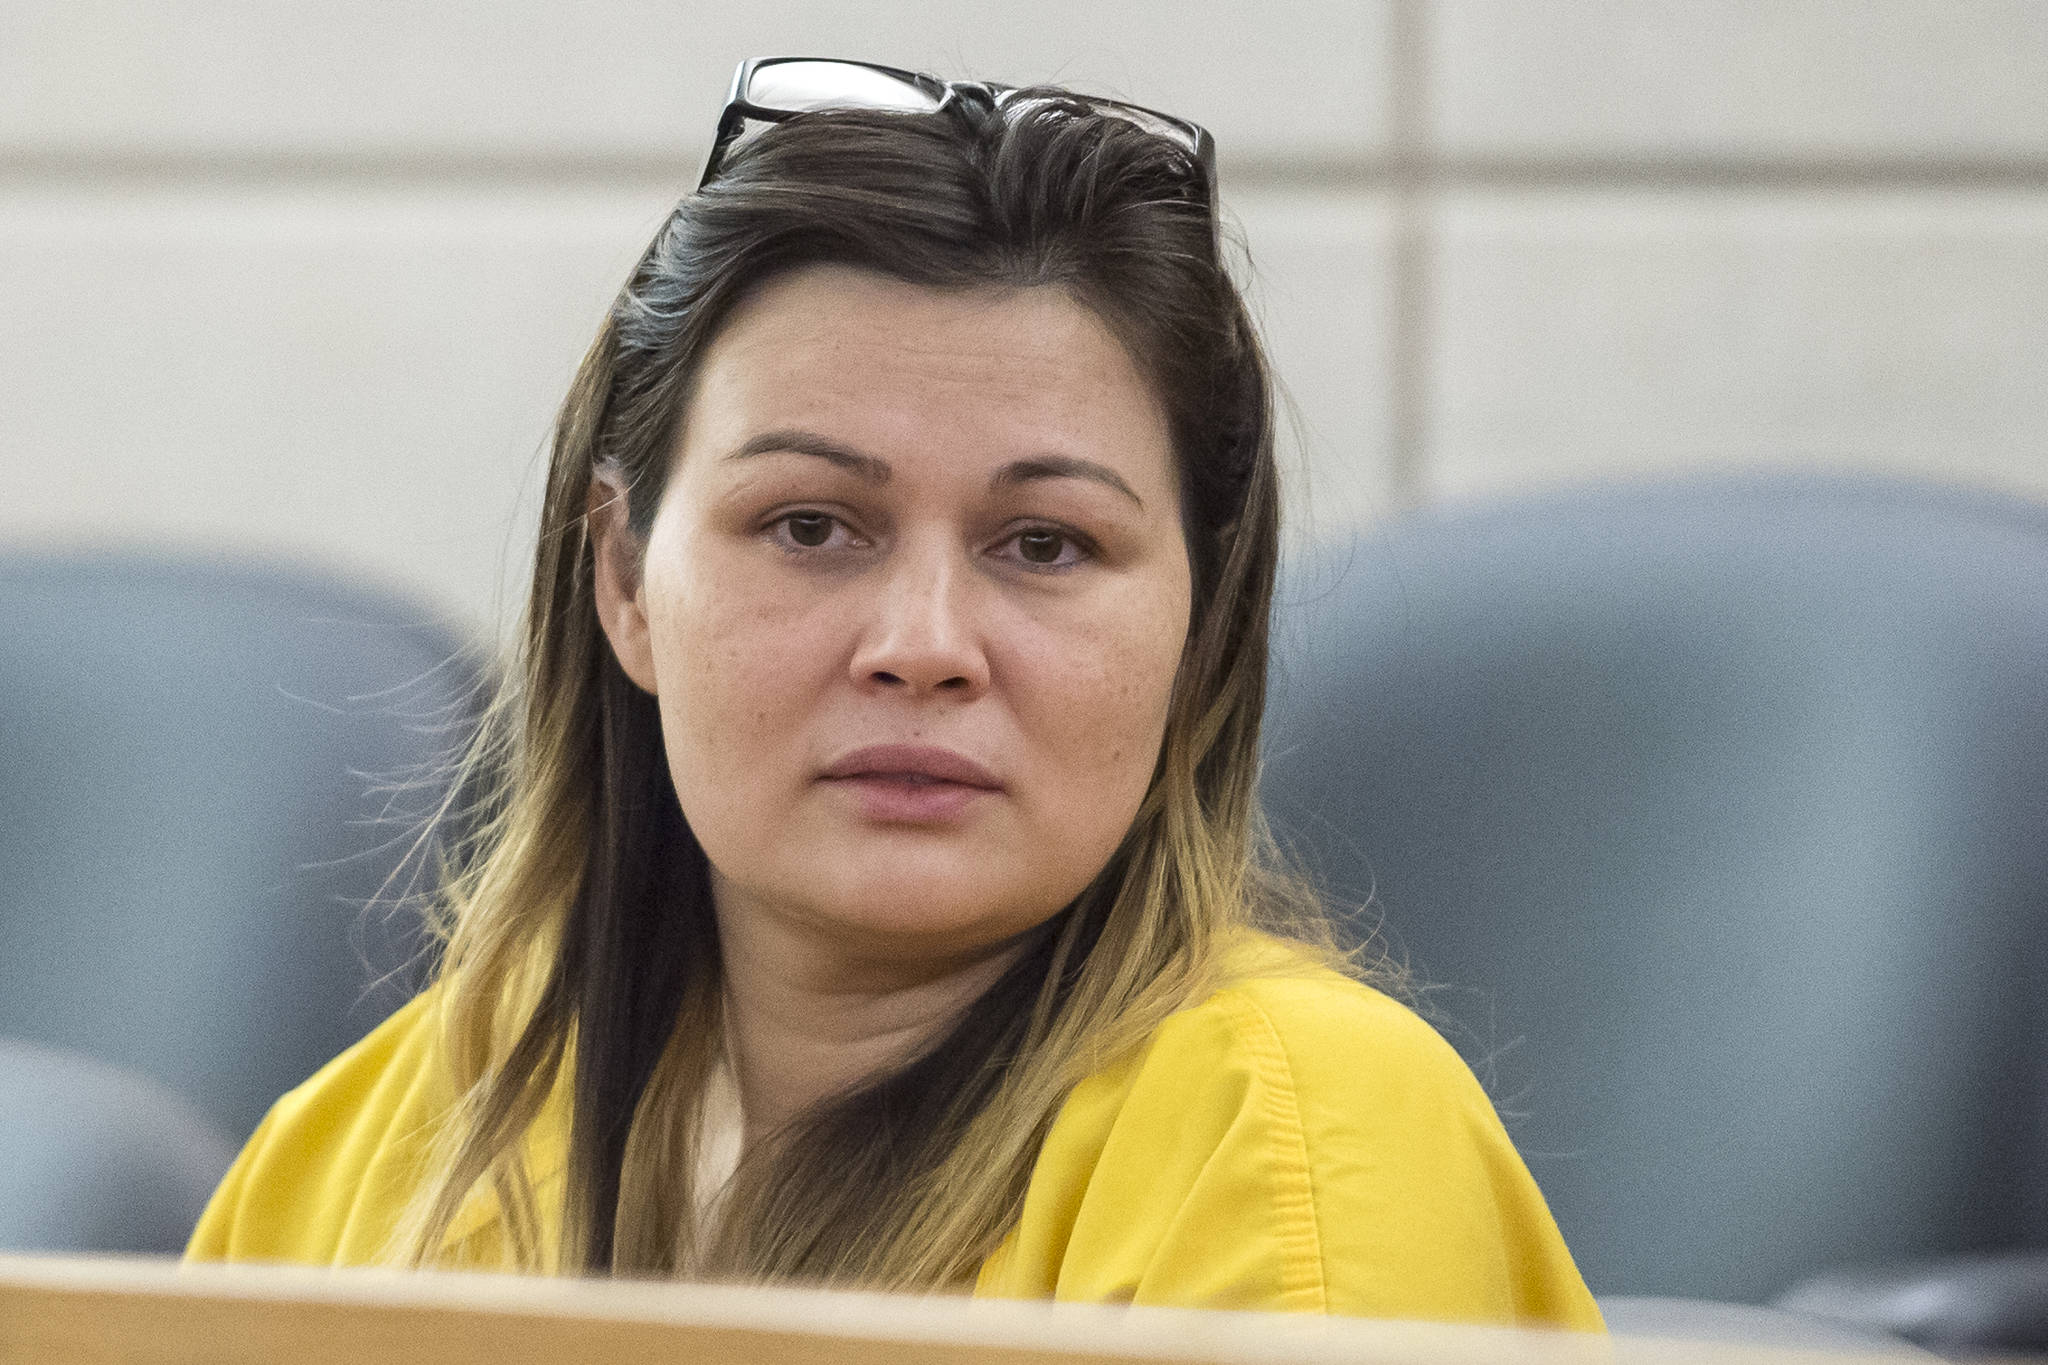 Jamie Diane Moy Singh, 35, appears in Juneau Superior Court on Monday, Dec. 17, 2018. Singh faces charges from an alleged March 6 assault that resulted in the death of her mother-in-law, Mary Lou Singh, 59. (Michael Penn | Juneau Empire)